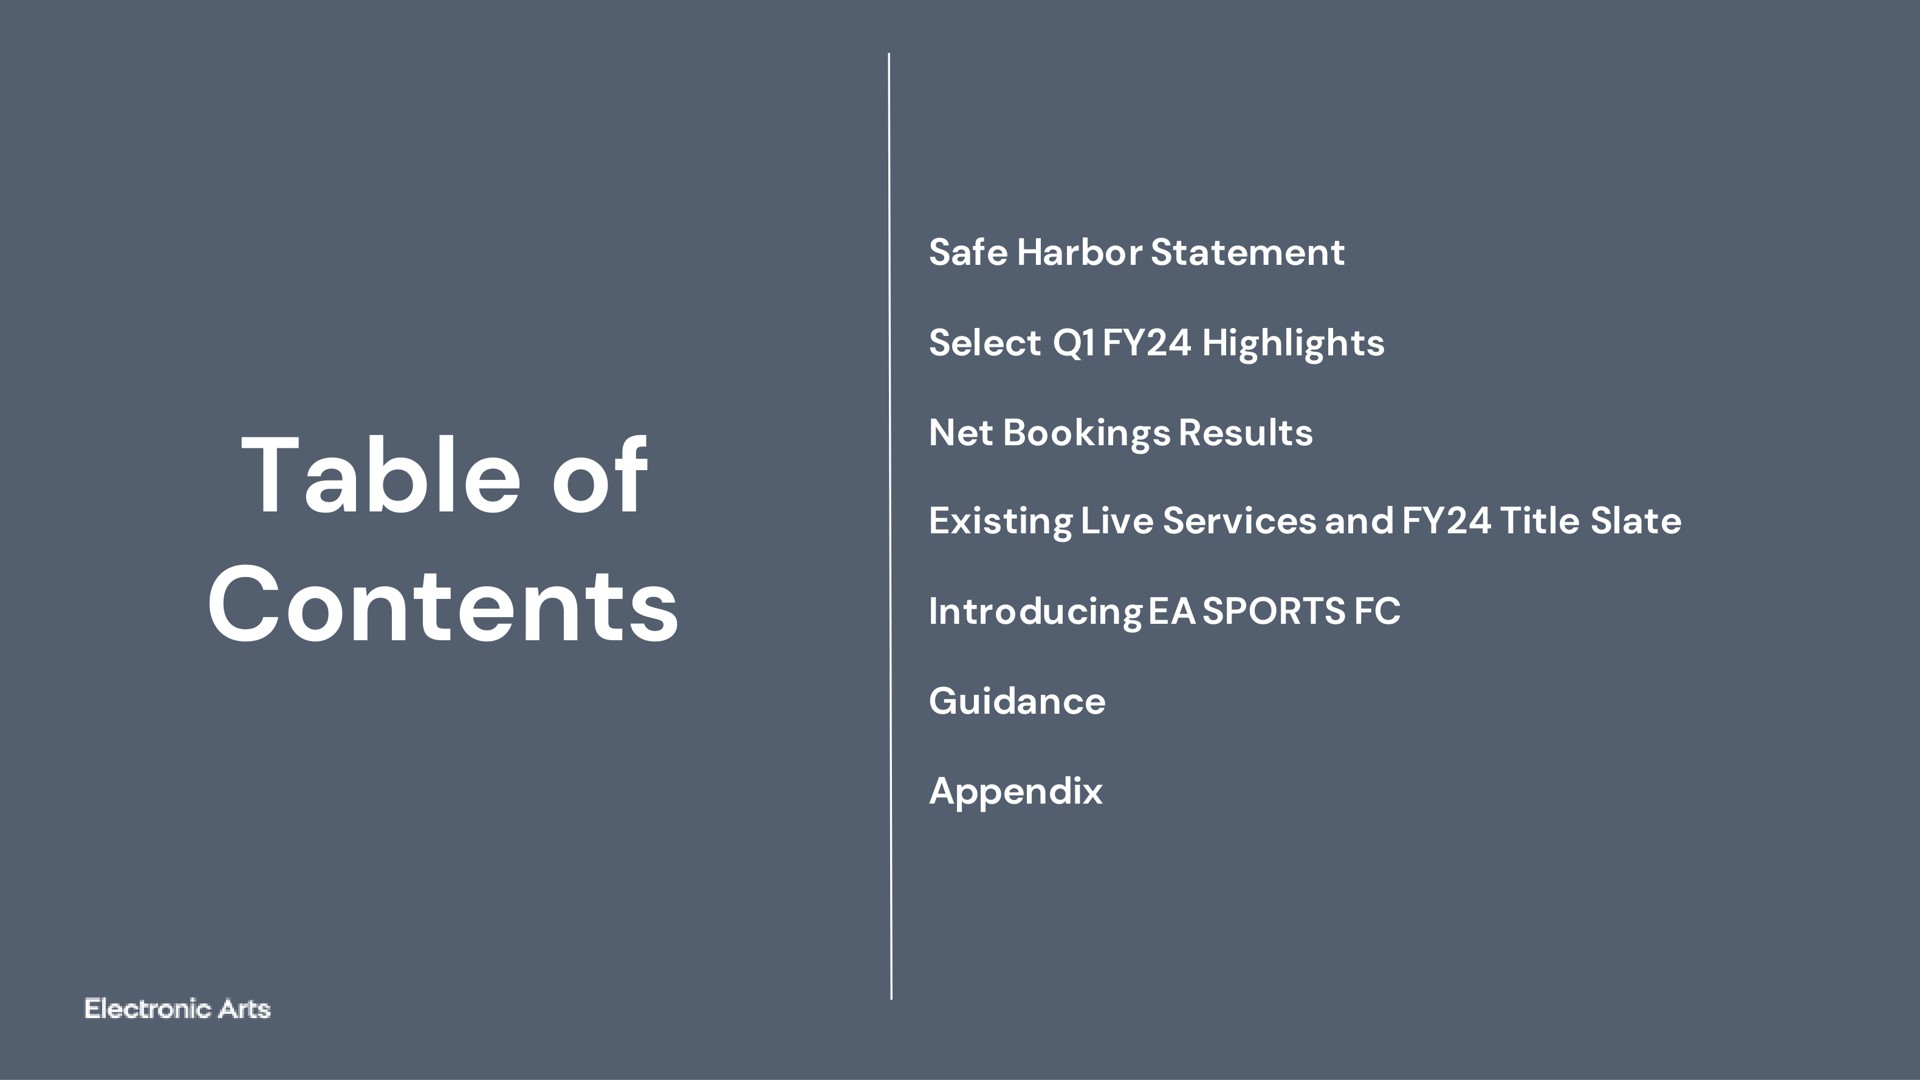 table of contents safe harbor statement select highlights net bookings results existing live services and title slate introducing sports guidance appendix | Electronic Arts